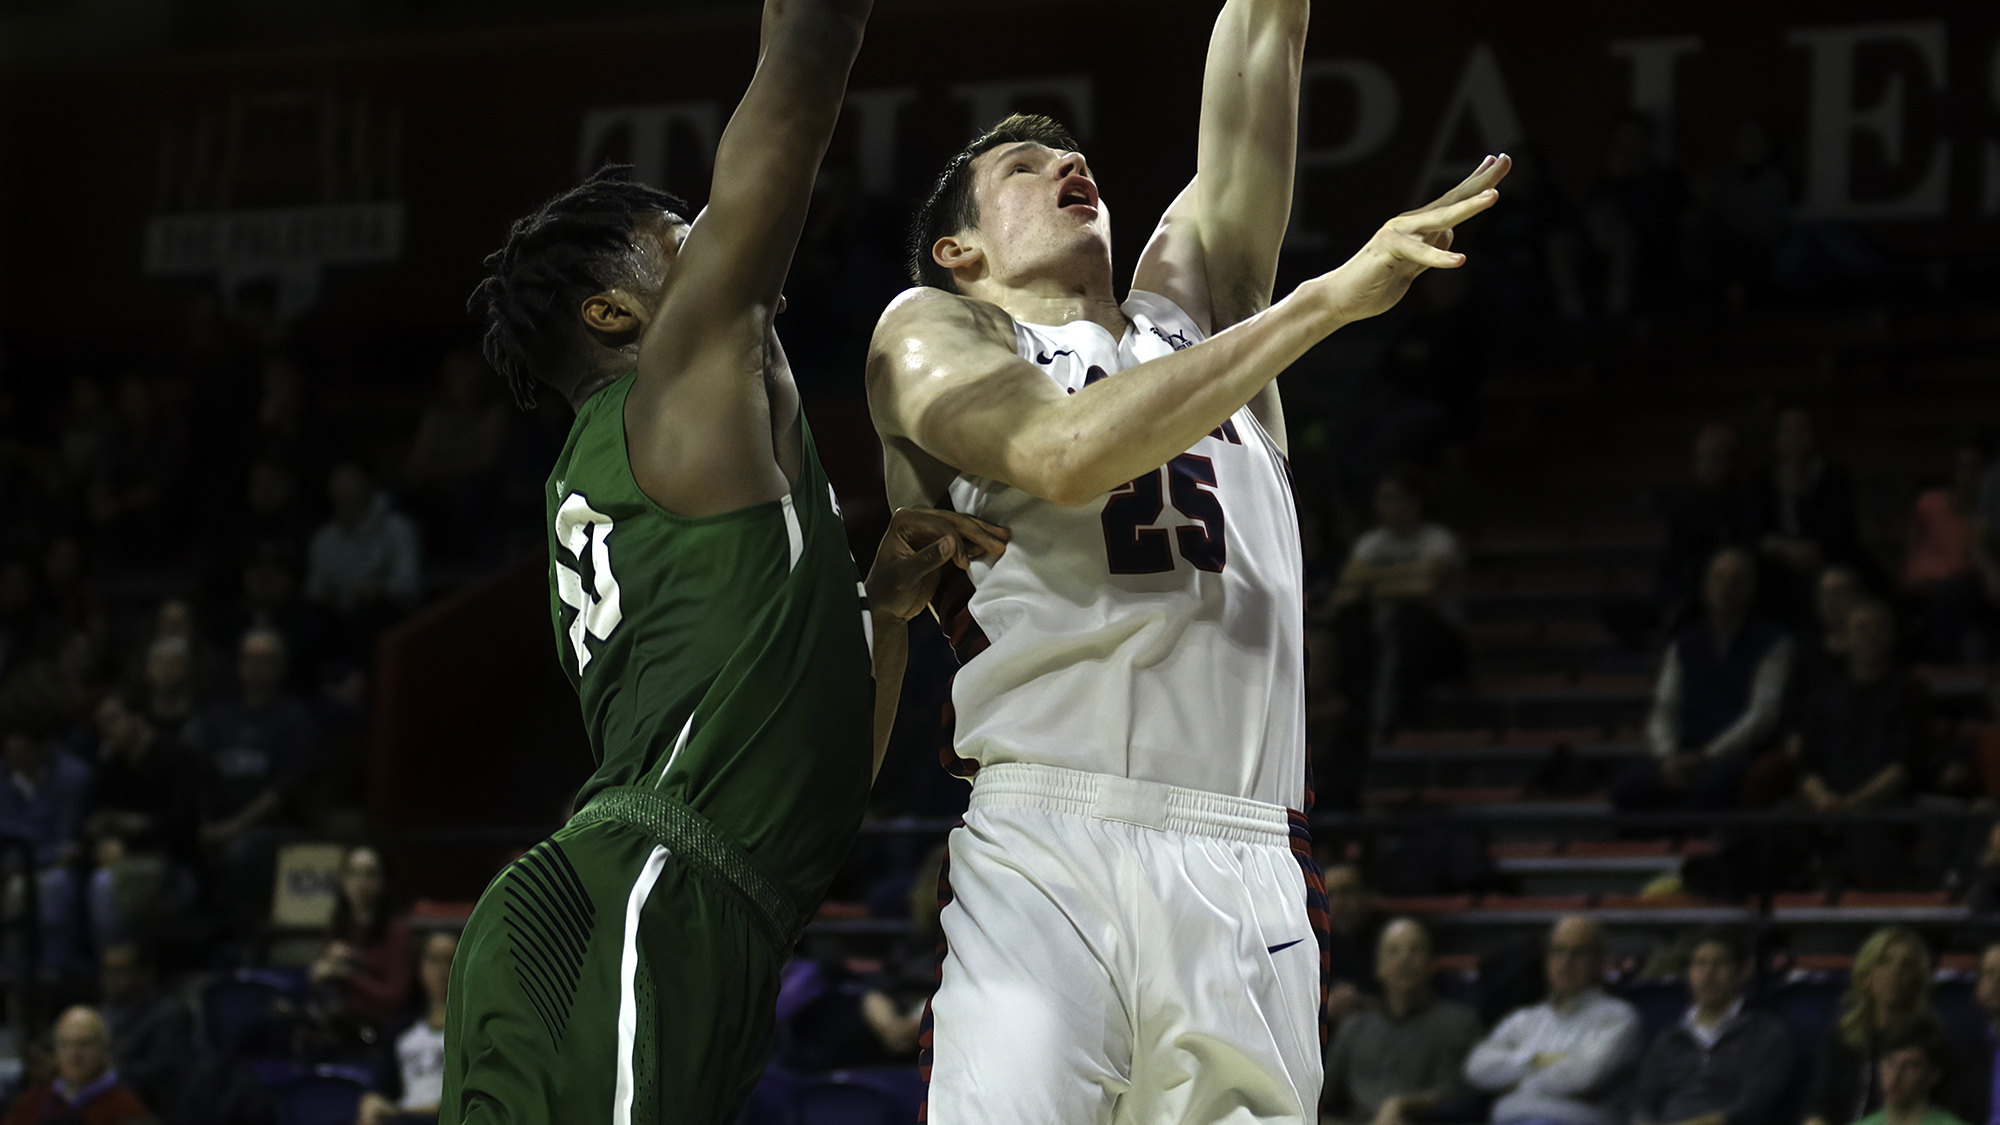 Senior forward A.J. Brodeur goes up for a layup against Dartmouth.